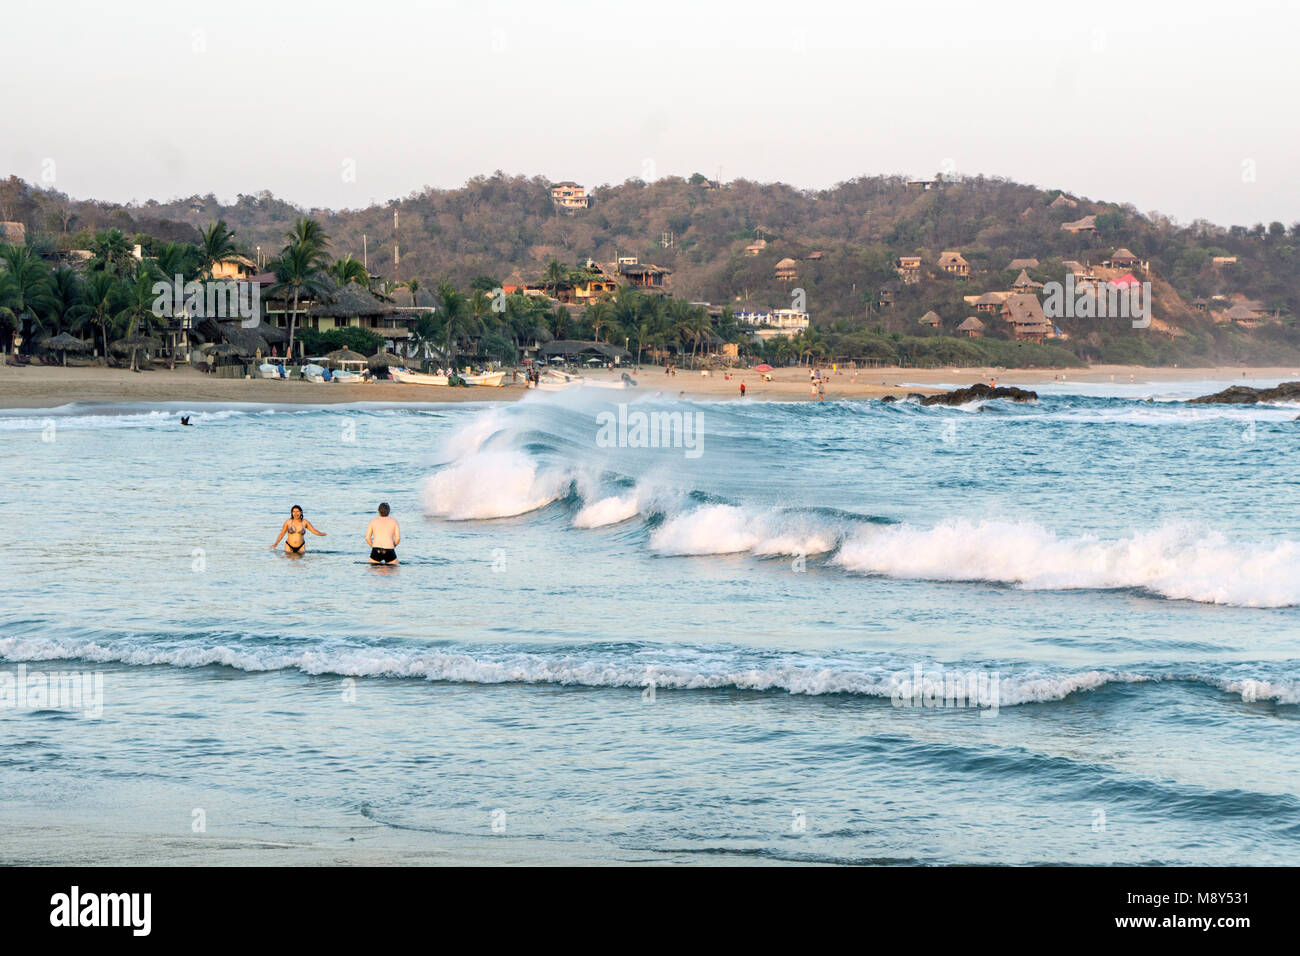 heavy surf breaks on San Agustinillo beach where fishing boats are beached & the shore is lined with palm trees & modest palapa roofed accommodations Stock Photo